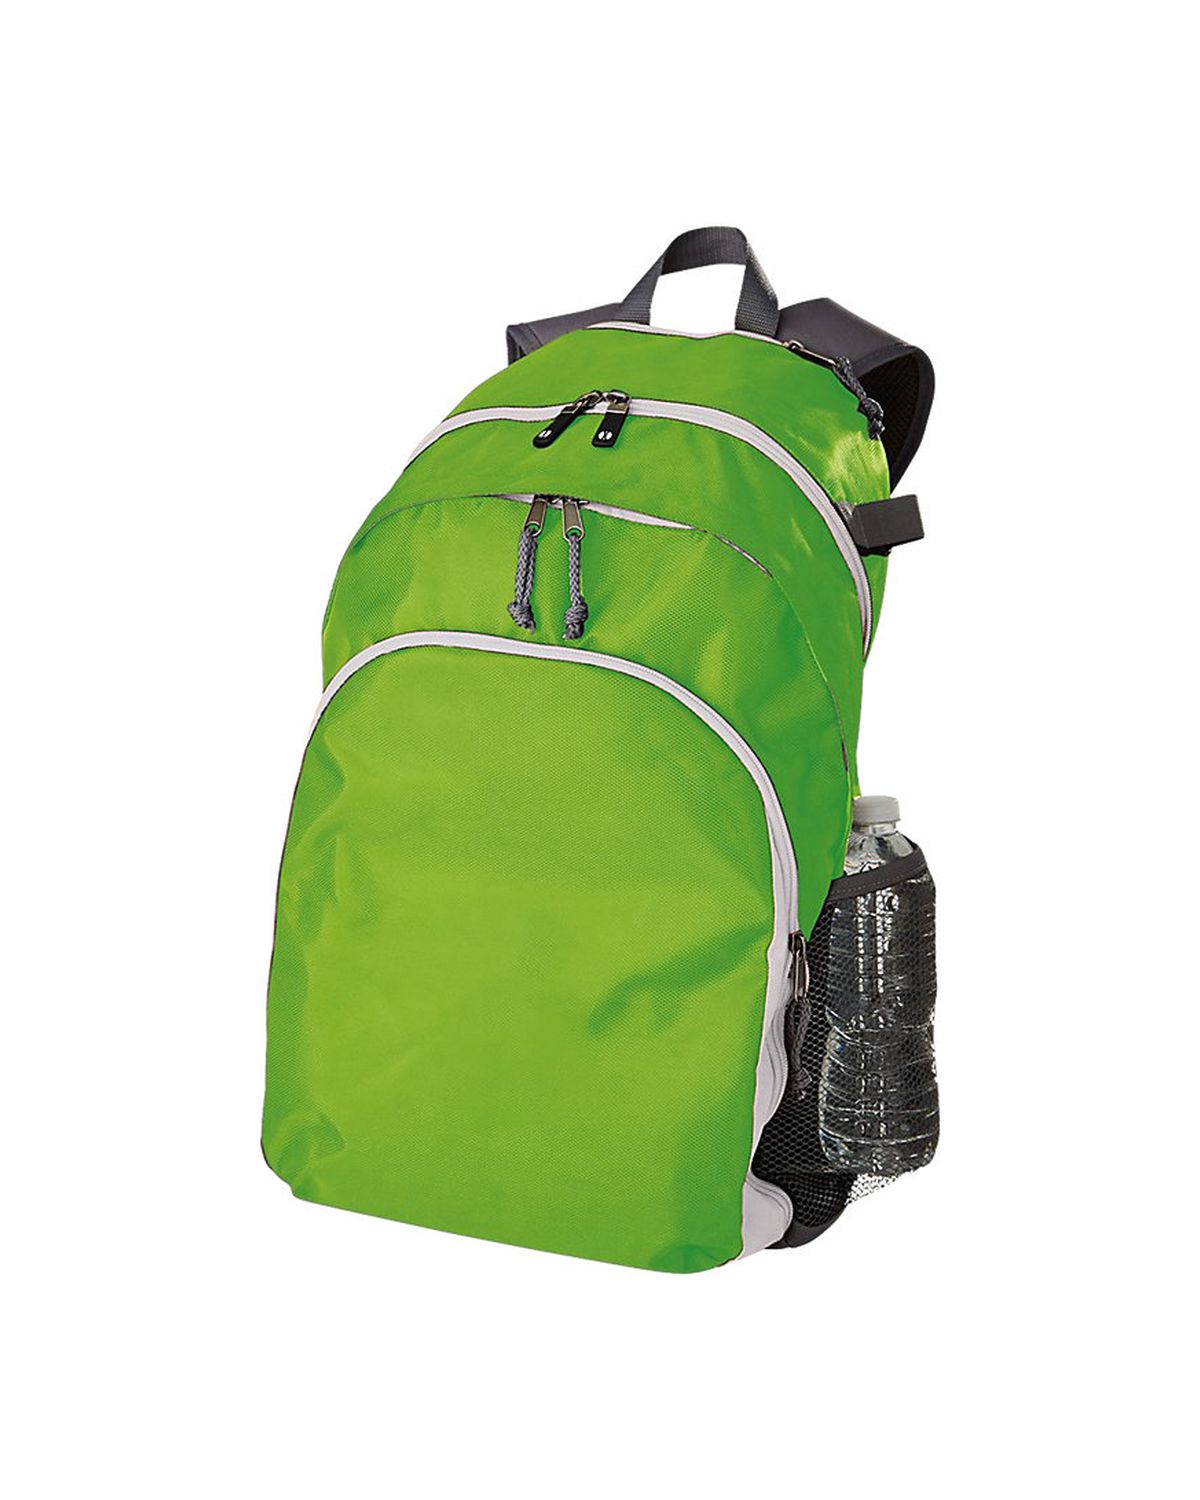 'Holloway 229009-C Prop Backpack'